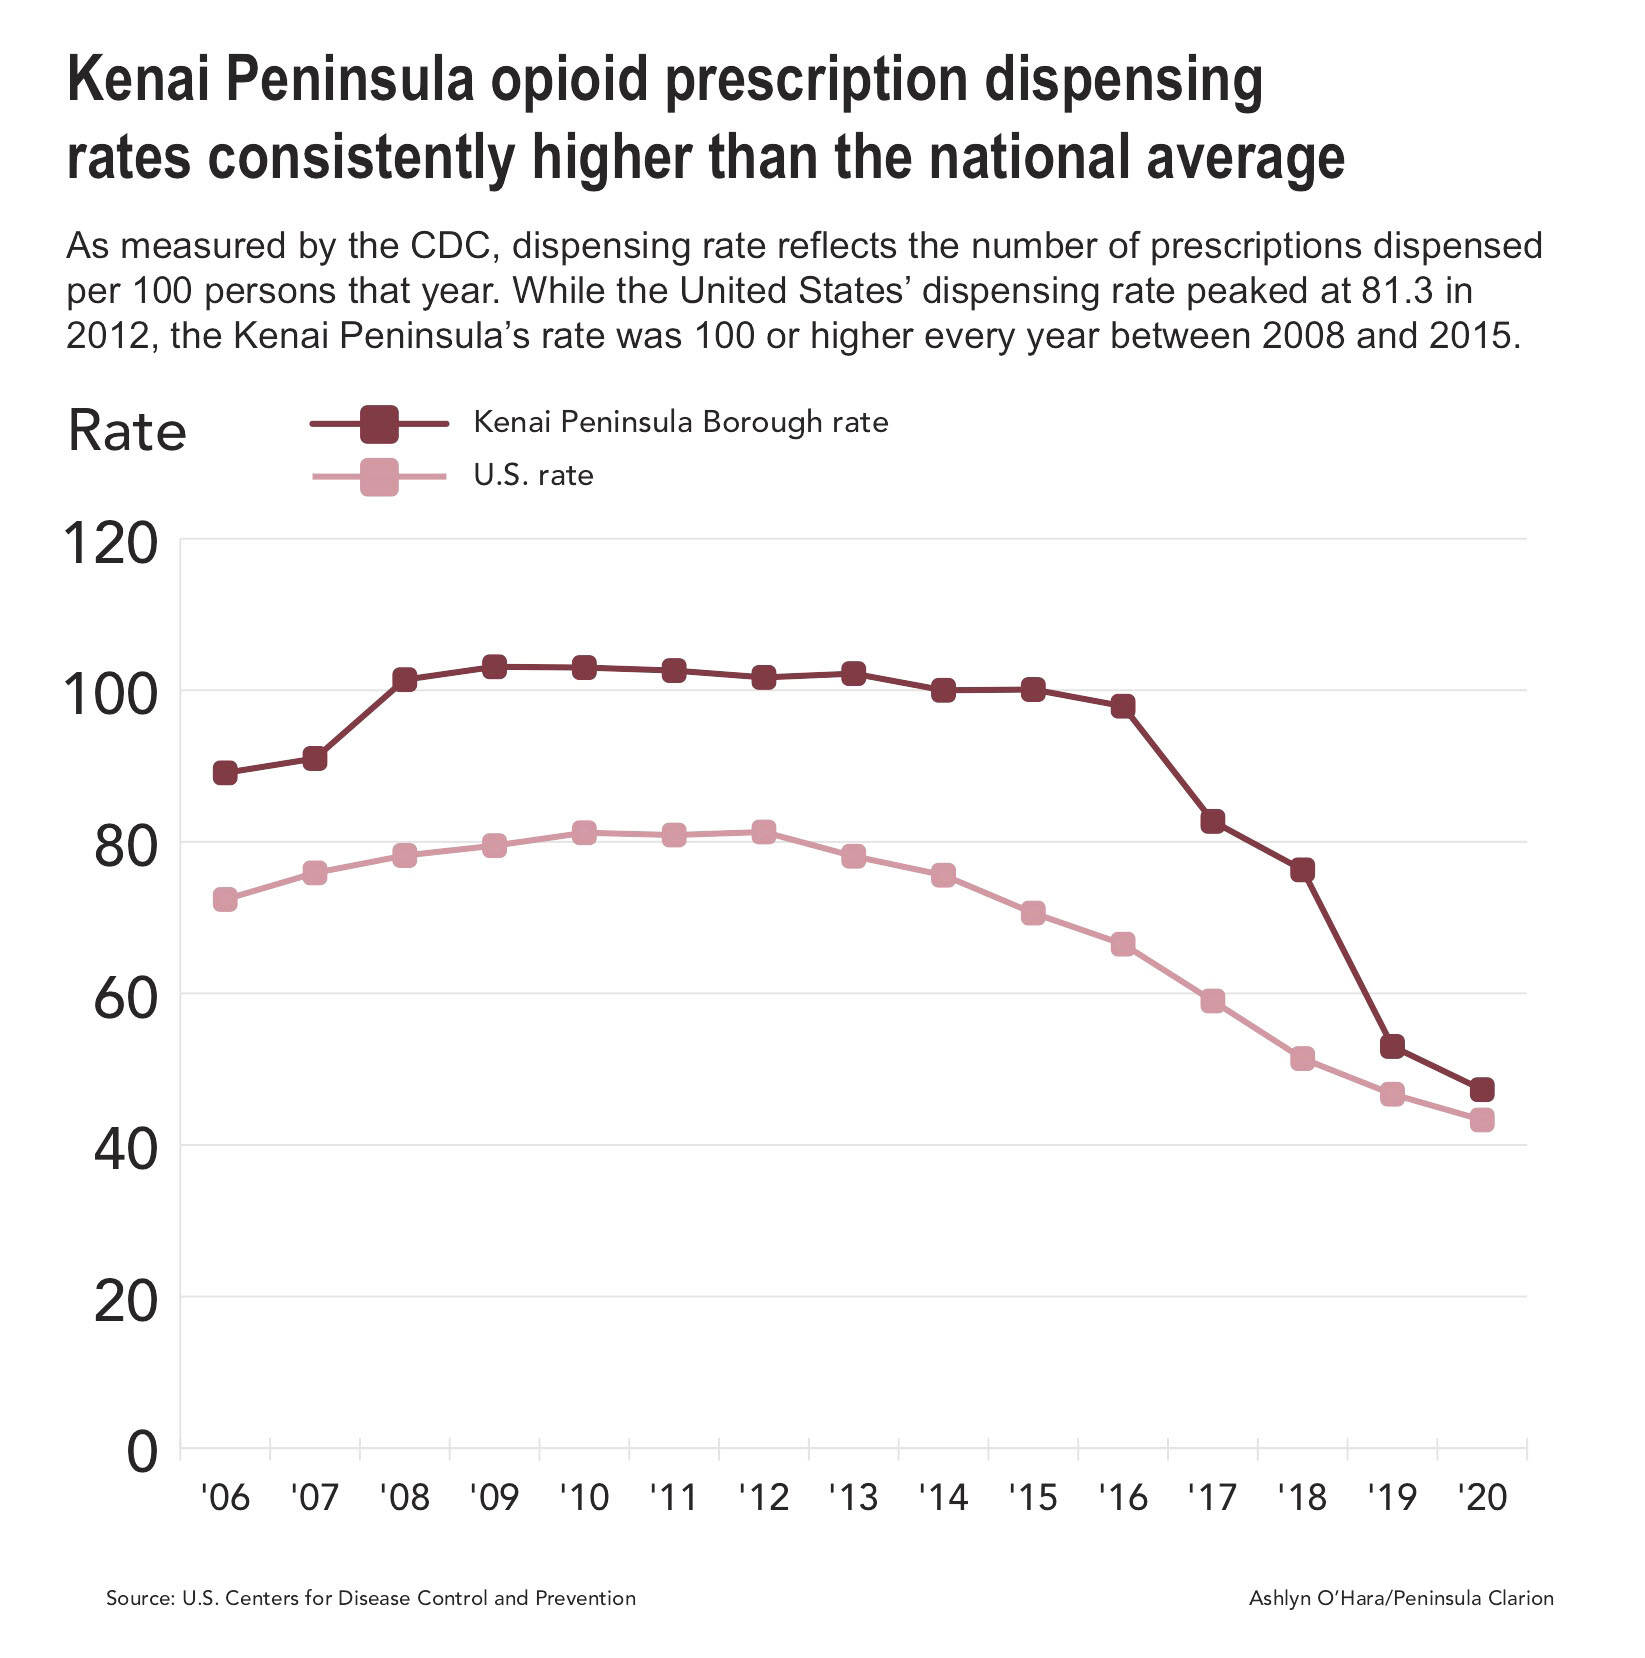 Graphic by Ashlyn O’Hara 
As measured by the CDC, dispensing rate reflects the number of prescriptions dispensed per 100 persons per year. While the United States’ dispensing rate peaked at 81.3 in 2012, the Kenai Peninsula’s rate was 100 or higher every year between 2001 and 2015.